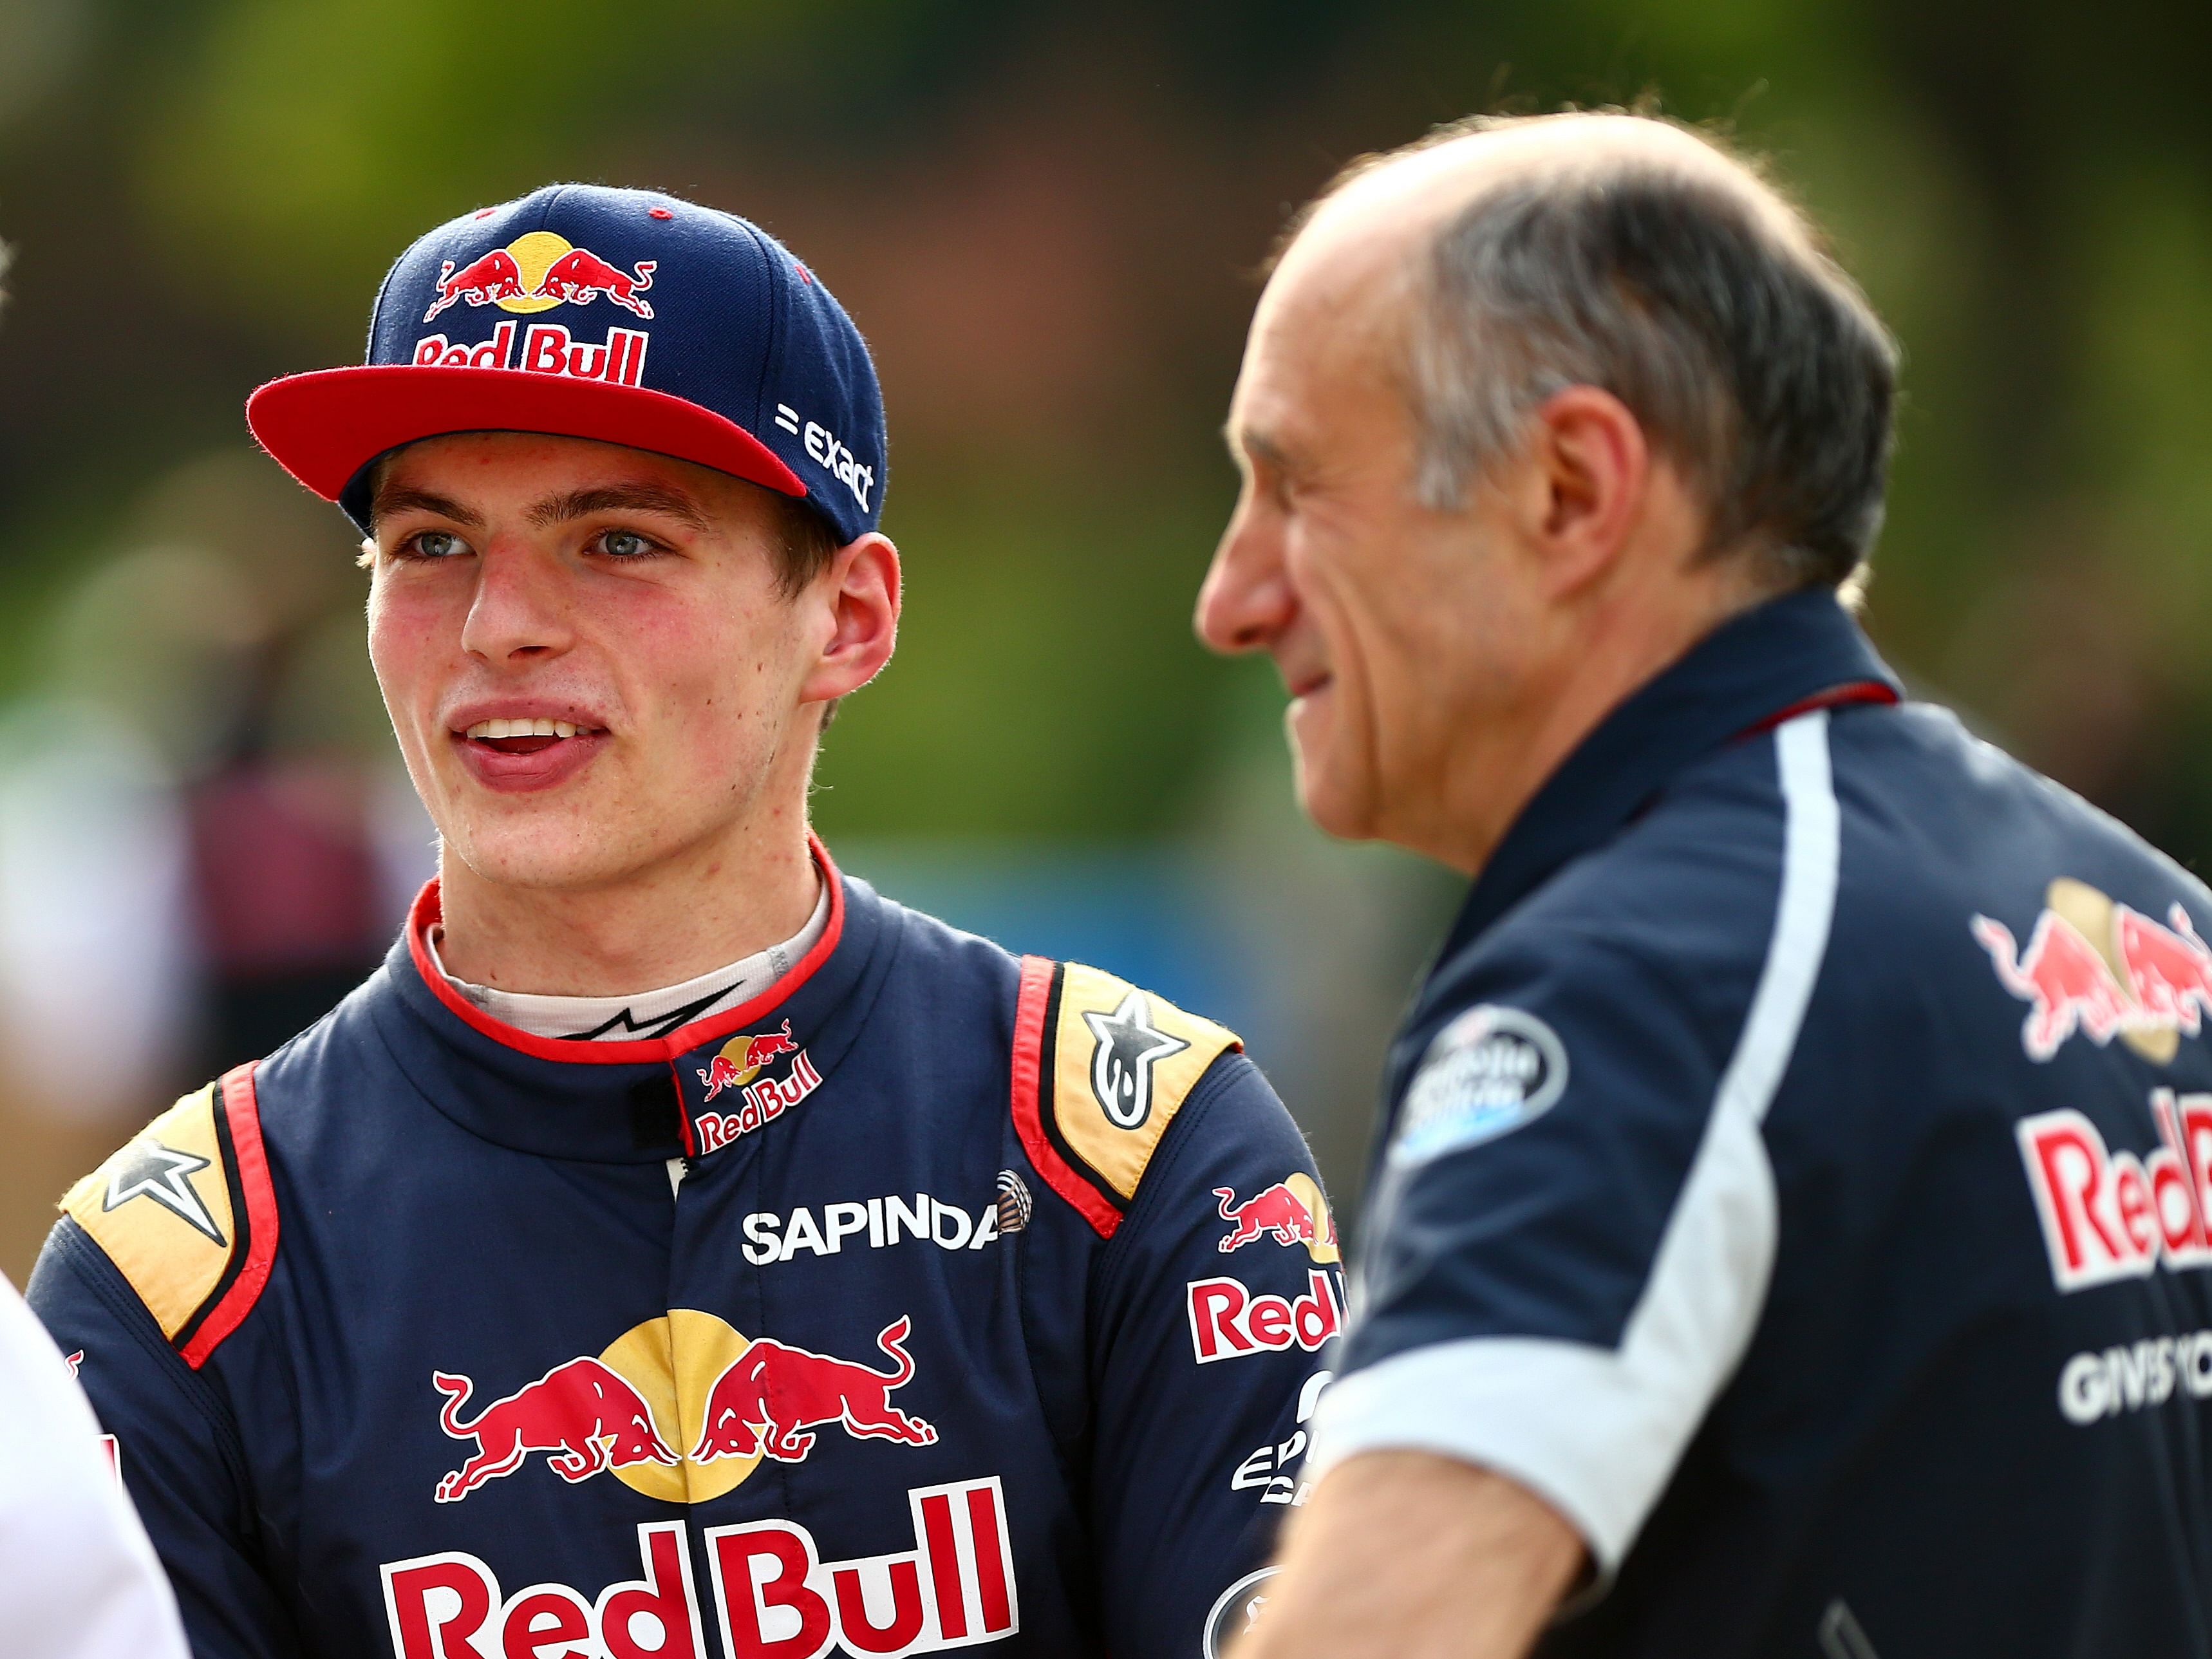 Max Verstappen with Franz Tost during the 2016 F1 Chinese Grand Prix. (Photo by Dan Istitene/Getty Images)